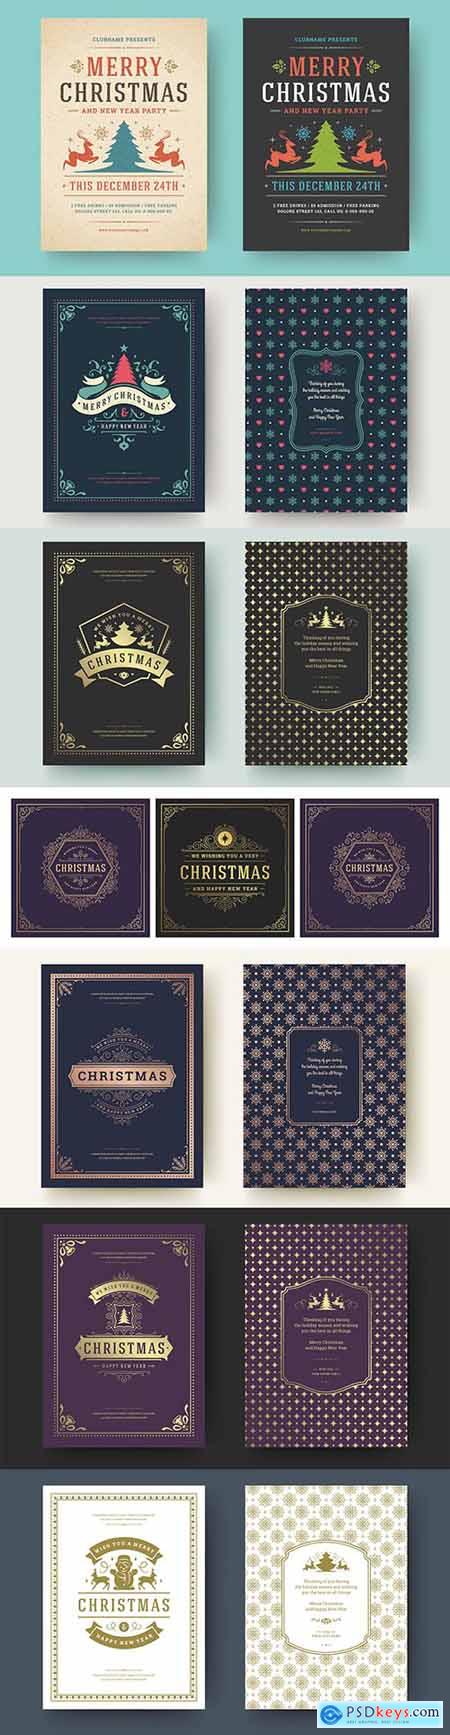 Christmas cards with vintage elements design template